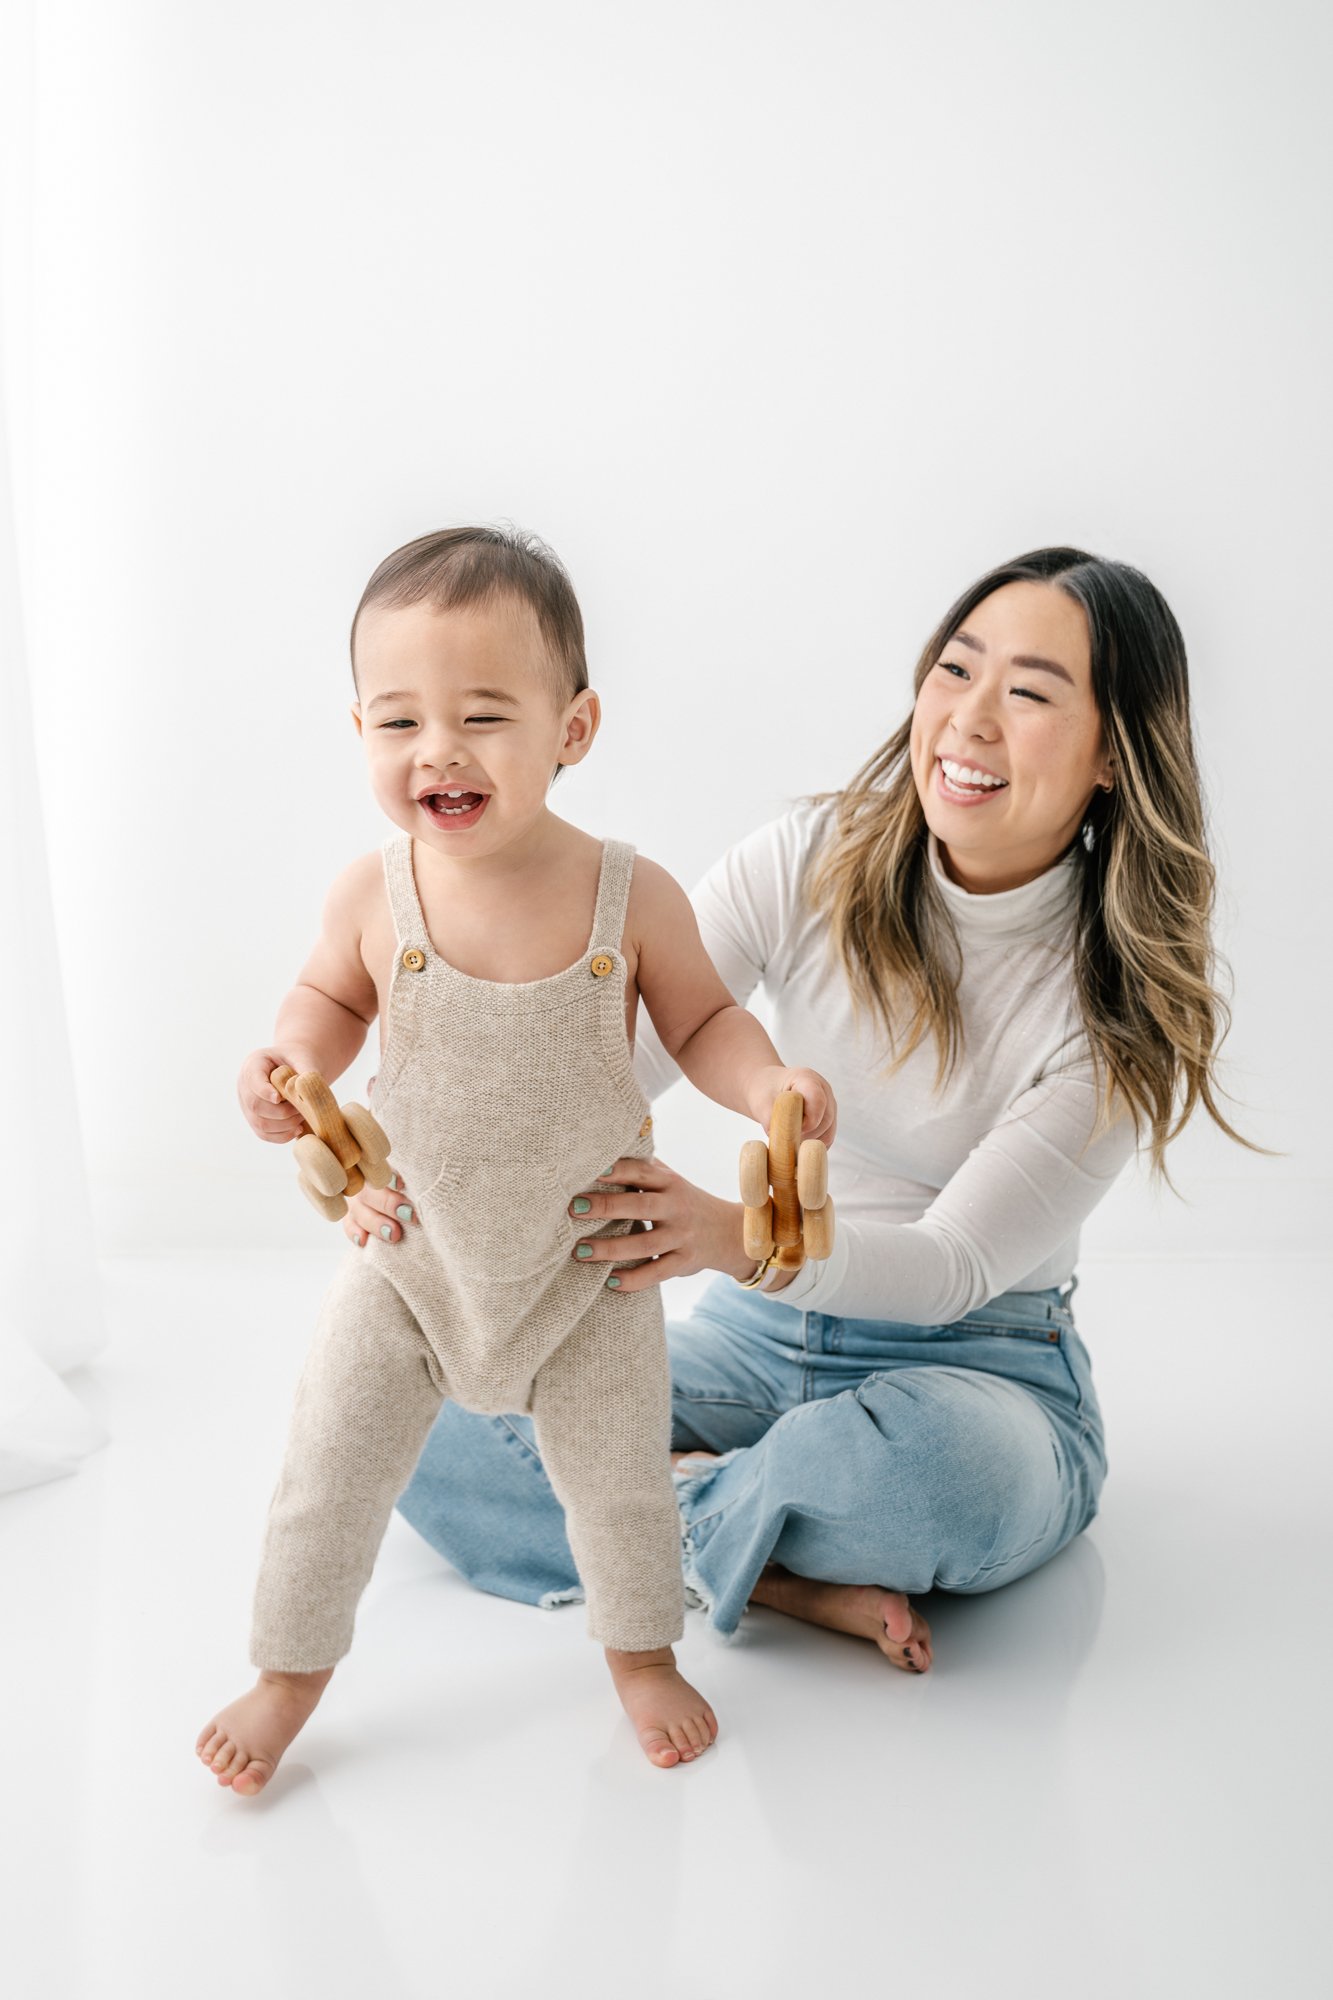   Photo of mom playing with toddler during casual studio family photoshoot. Mom and toddler posing ideas toddler portrait inspiration #EssexCountyFamilyPhotographer #BergenCountyFamilyPhotographer #NorthernNewJerseyFamilyPhotographer #ManhattanPhotog